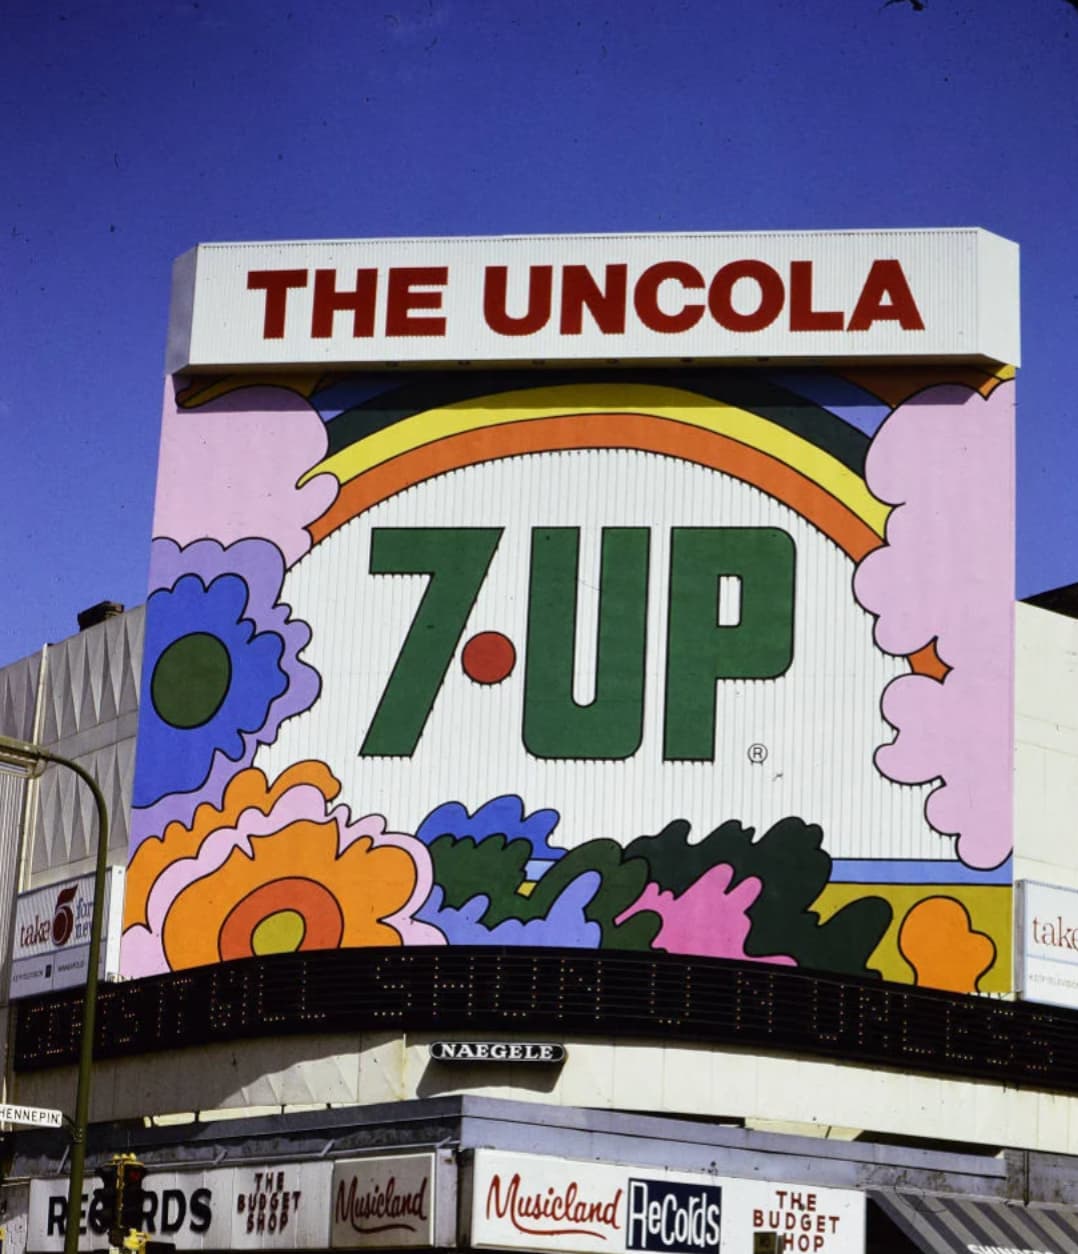 billboard - take The Uncola 7Up Naegele Hennepin B The Reds Musieland Musicland Records The Budget Whop tak